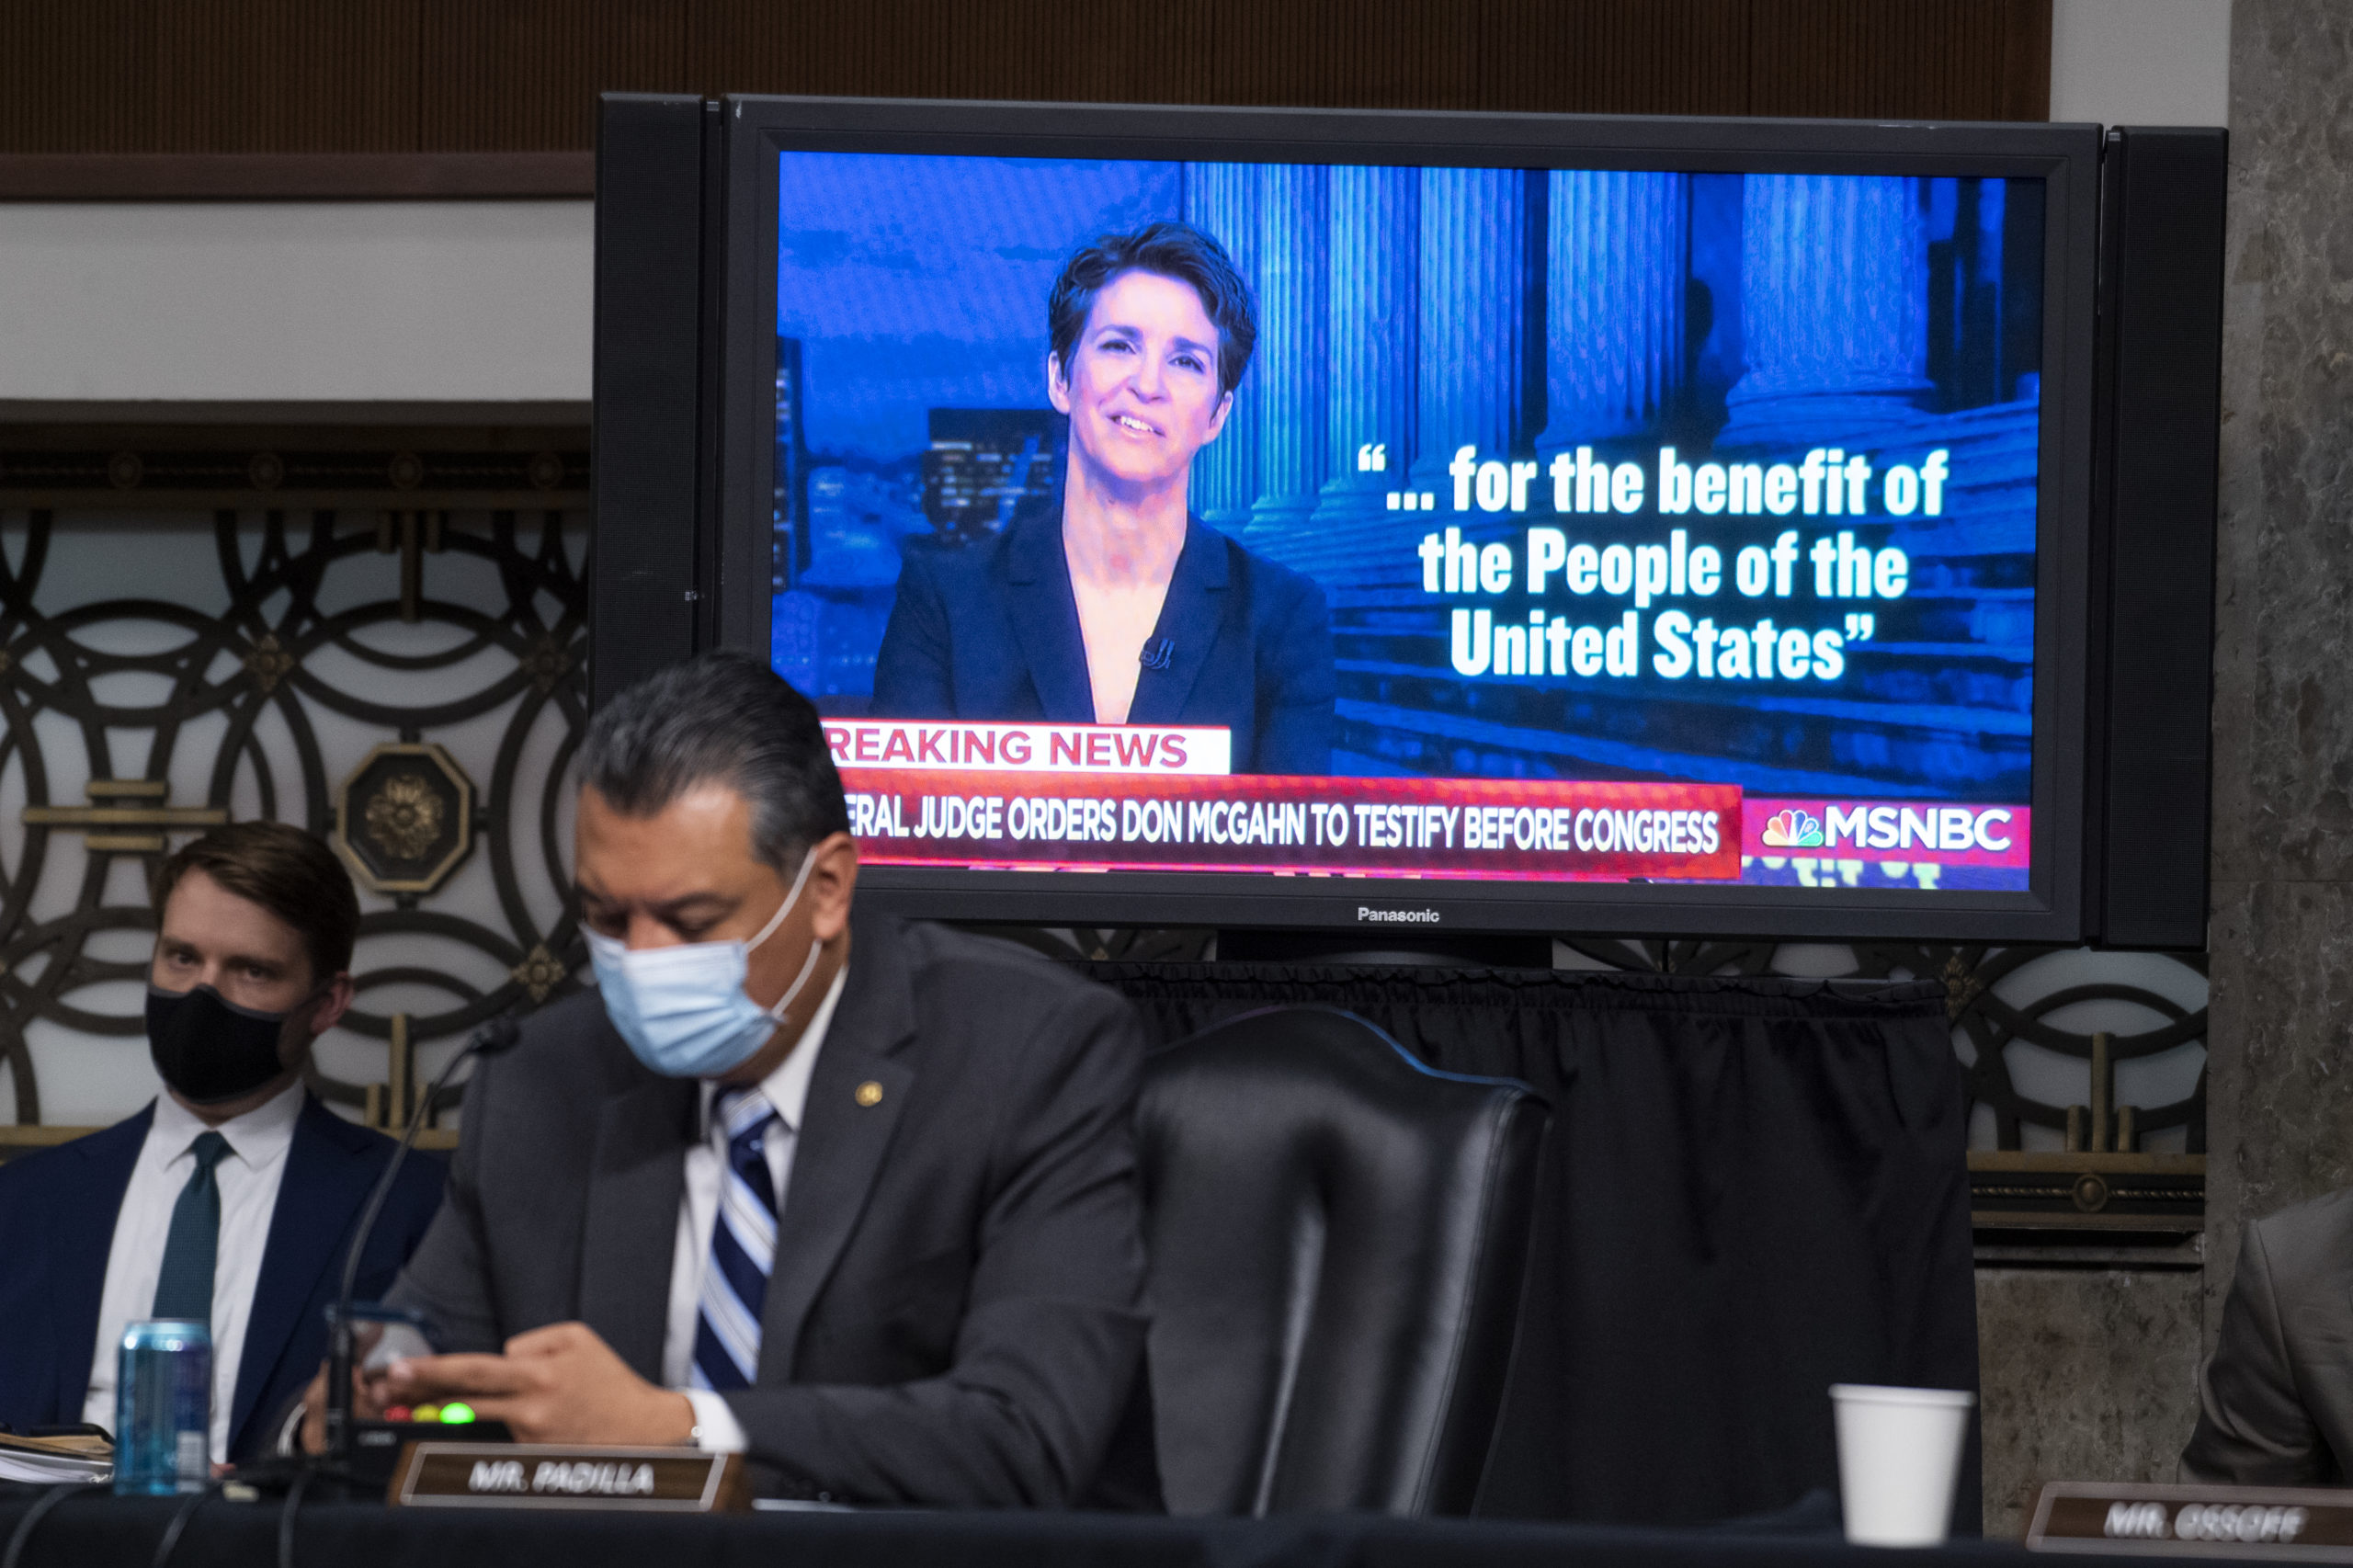 WASHINGTON, DC - APRIL 28: A clip from the Rachel Maddow Show is played during the Senate Judiciary Committee confirmation hearing in Dirksen Senate Office Building on April 28, 2021 in Washington, DC. Ketanji Brown Jackson, nominee to be U.S. Circuit Judge for the District of Columbia Circuit, and Candace Jackson-Akiwumi, nominee to be U.S. Circuit Judge for the Seventh Circuit, testified on the first panel. (Photo By Tom Williams-Pool/Getty Images)